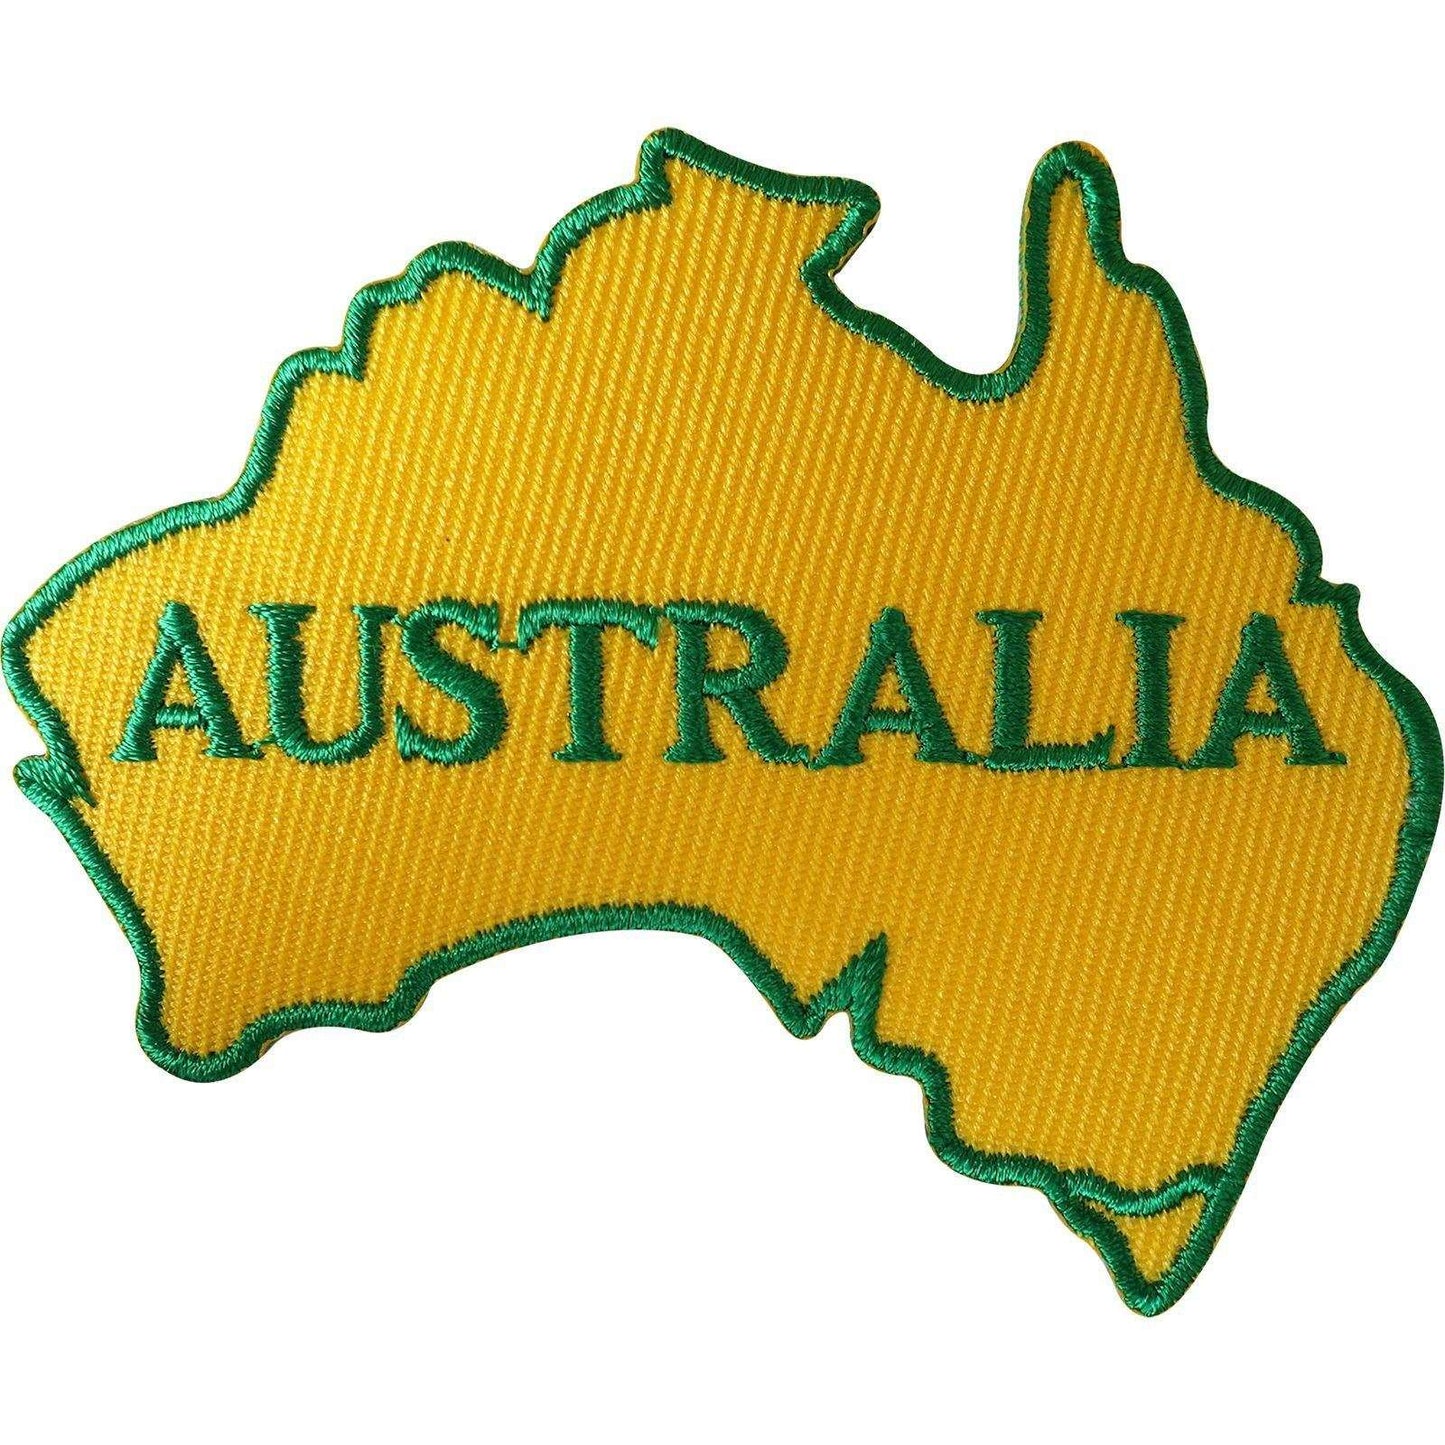 Australia Patch Iron On Sew On Clothes Jacket Jeans Australian Embroidered Badge